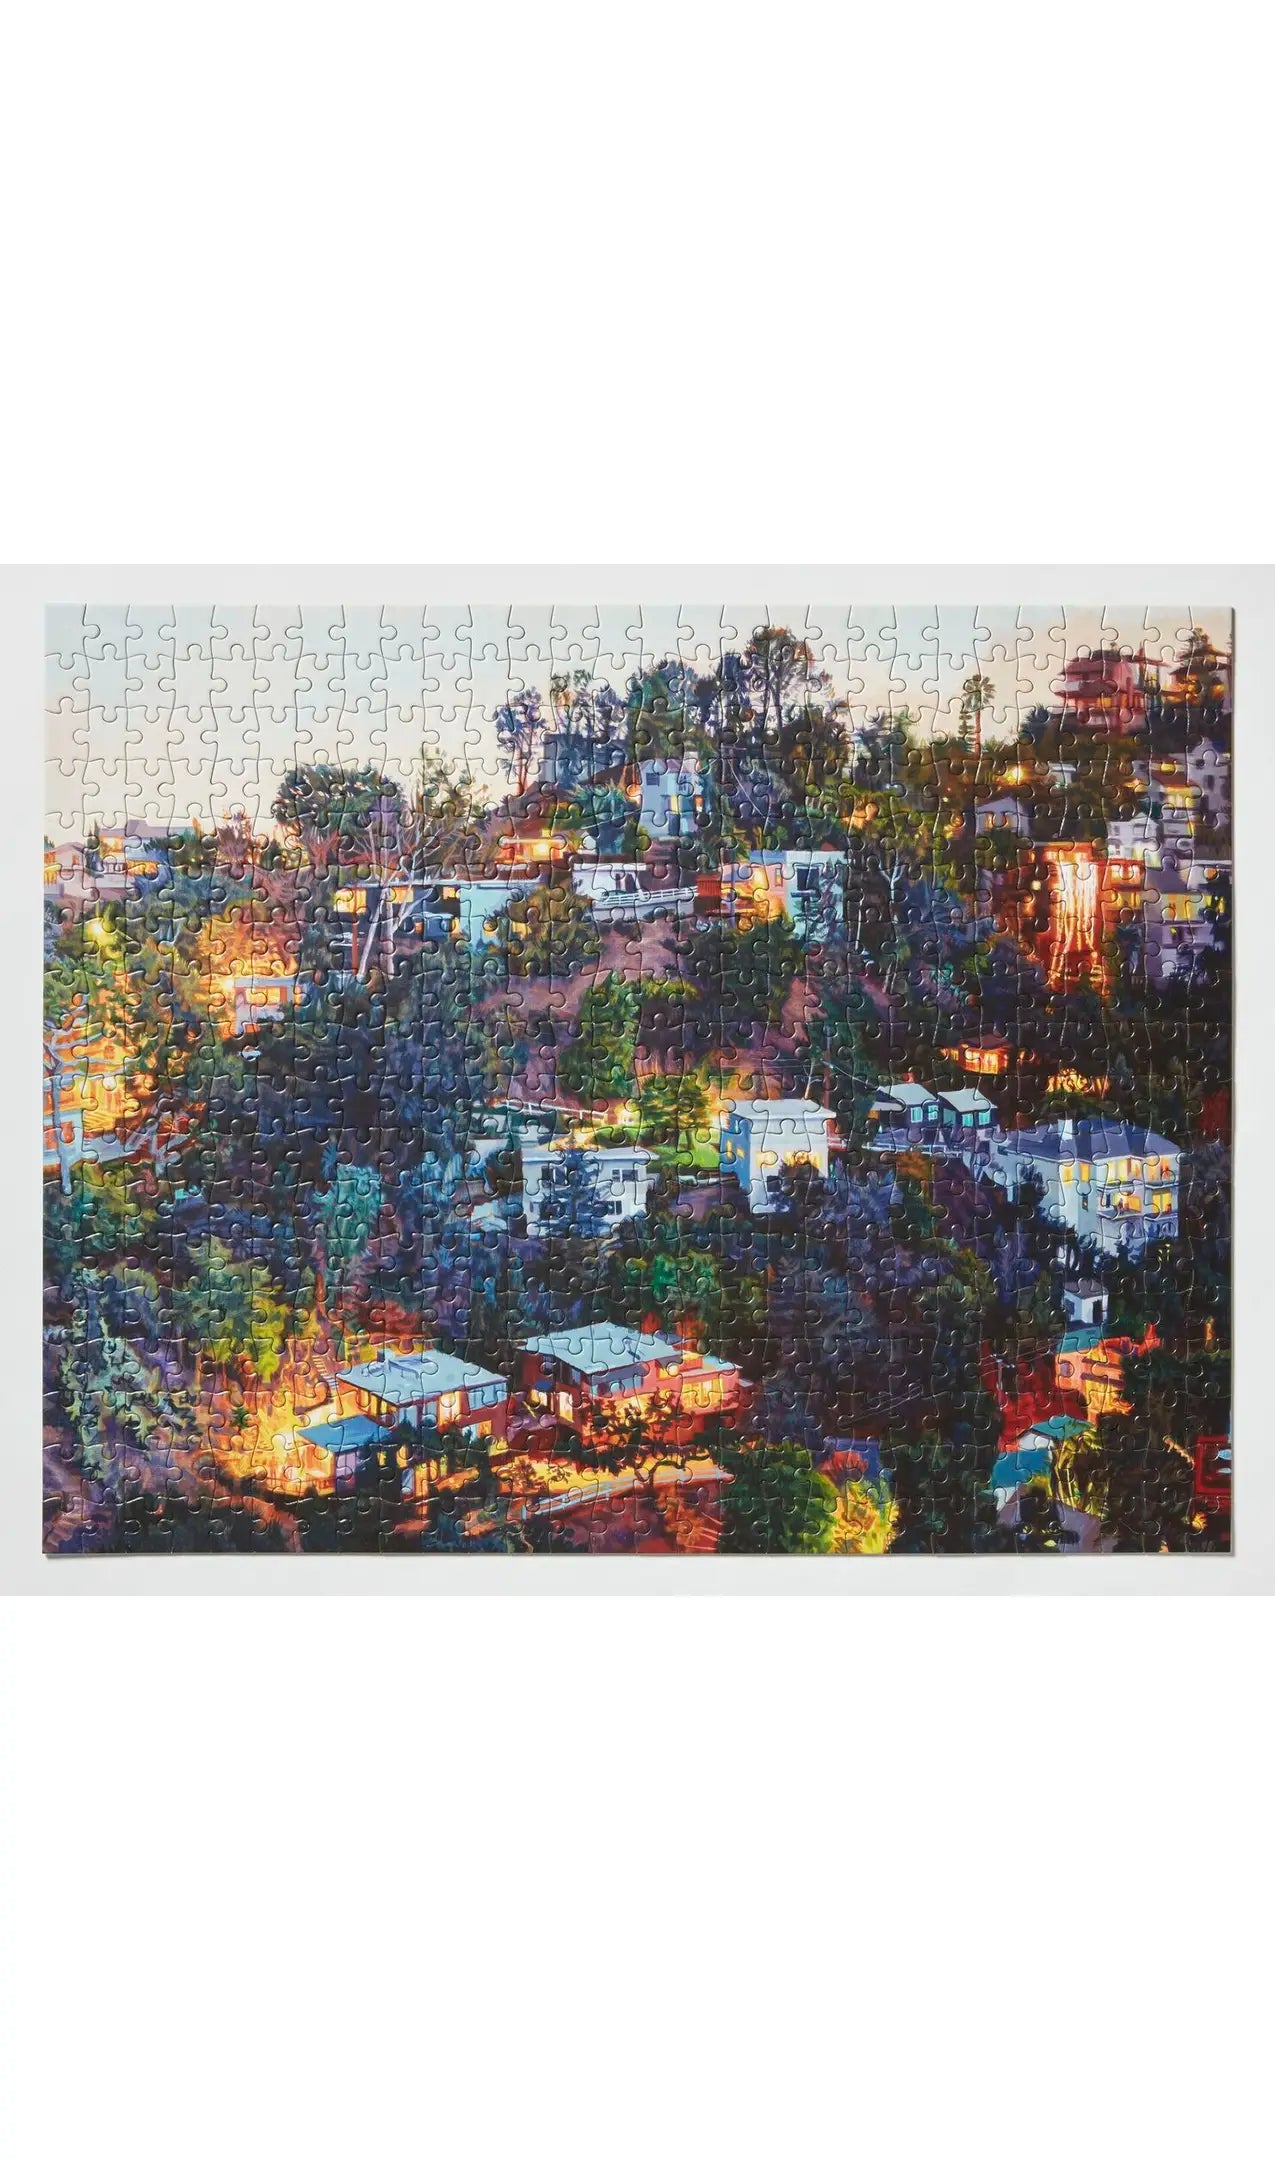 “Laurel Canyon” 500 piece puzzle by Inner Piece